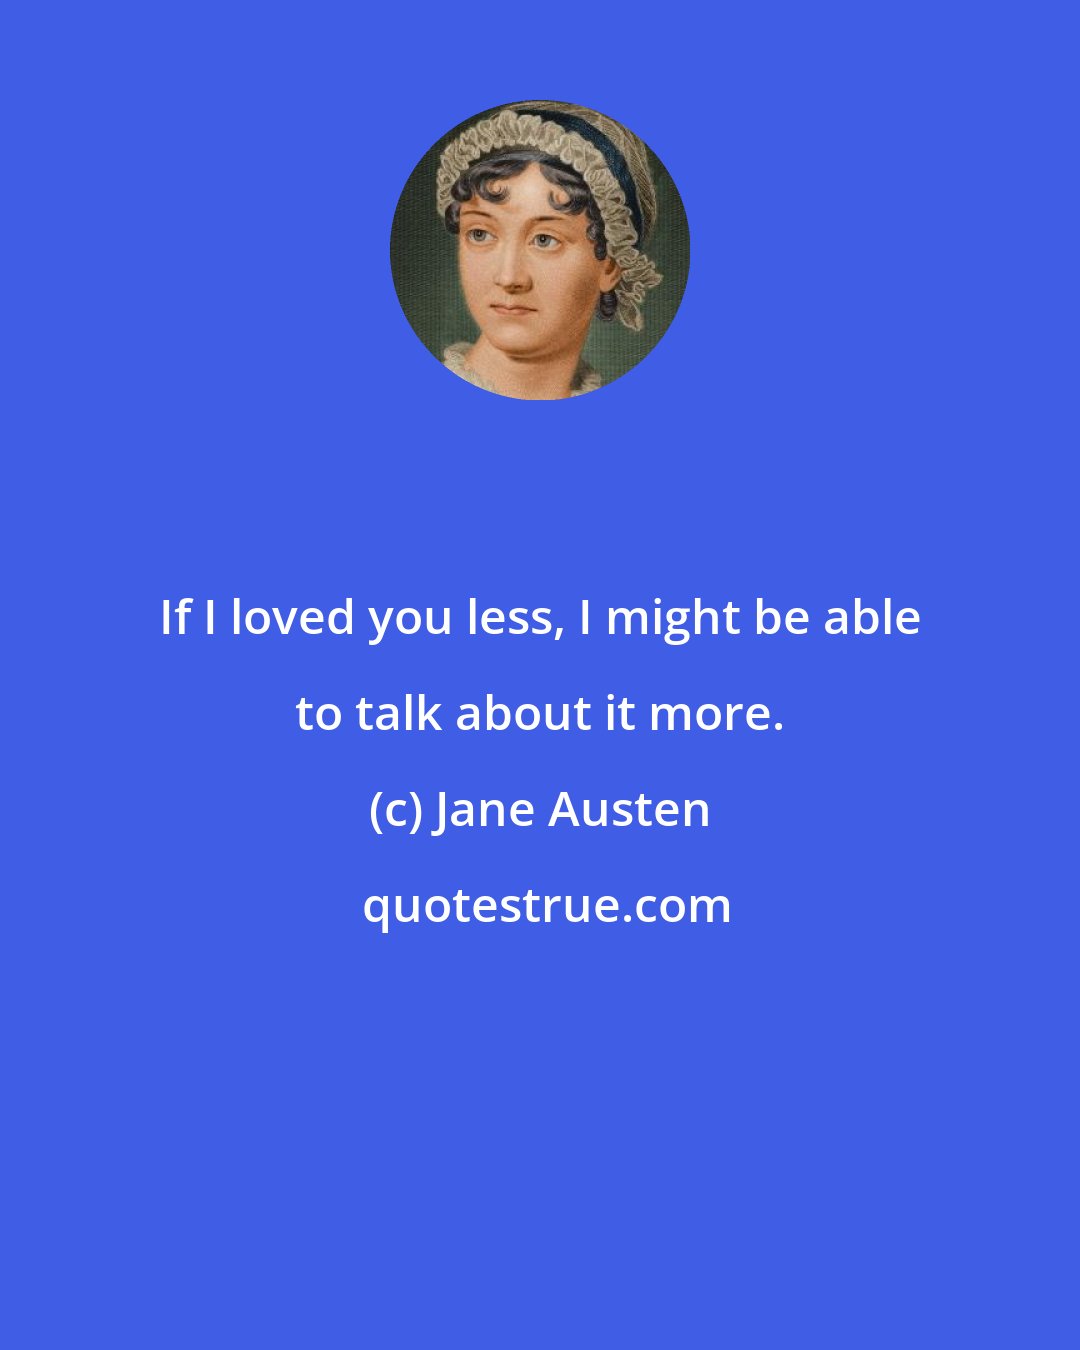 Jane Austen: If I loved you less, I might be able to talk about it more.